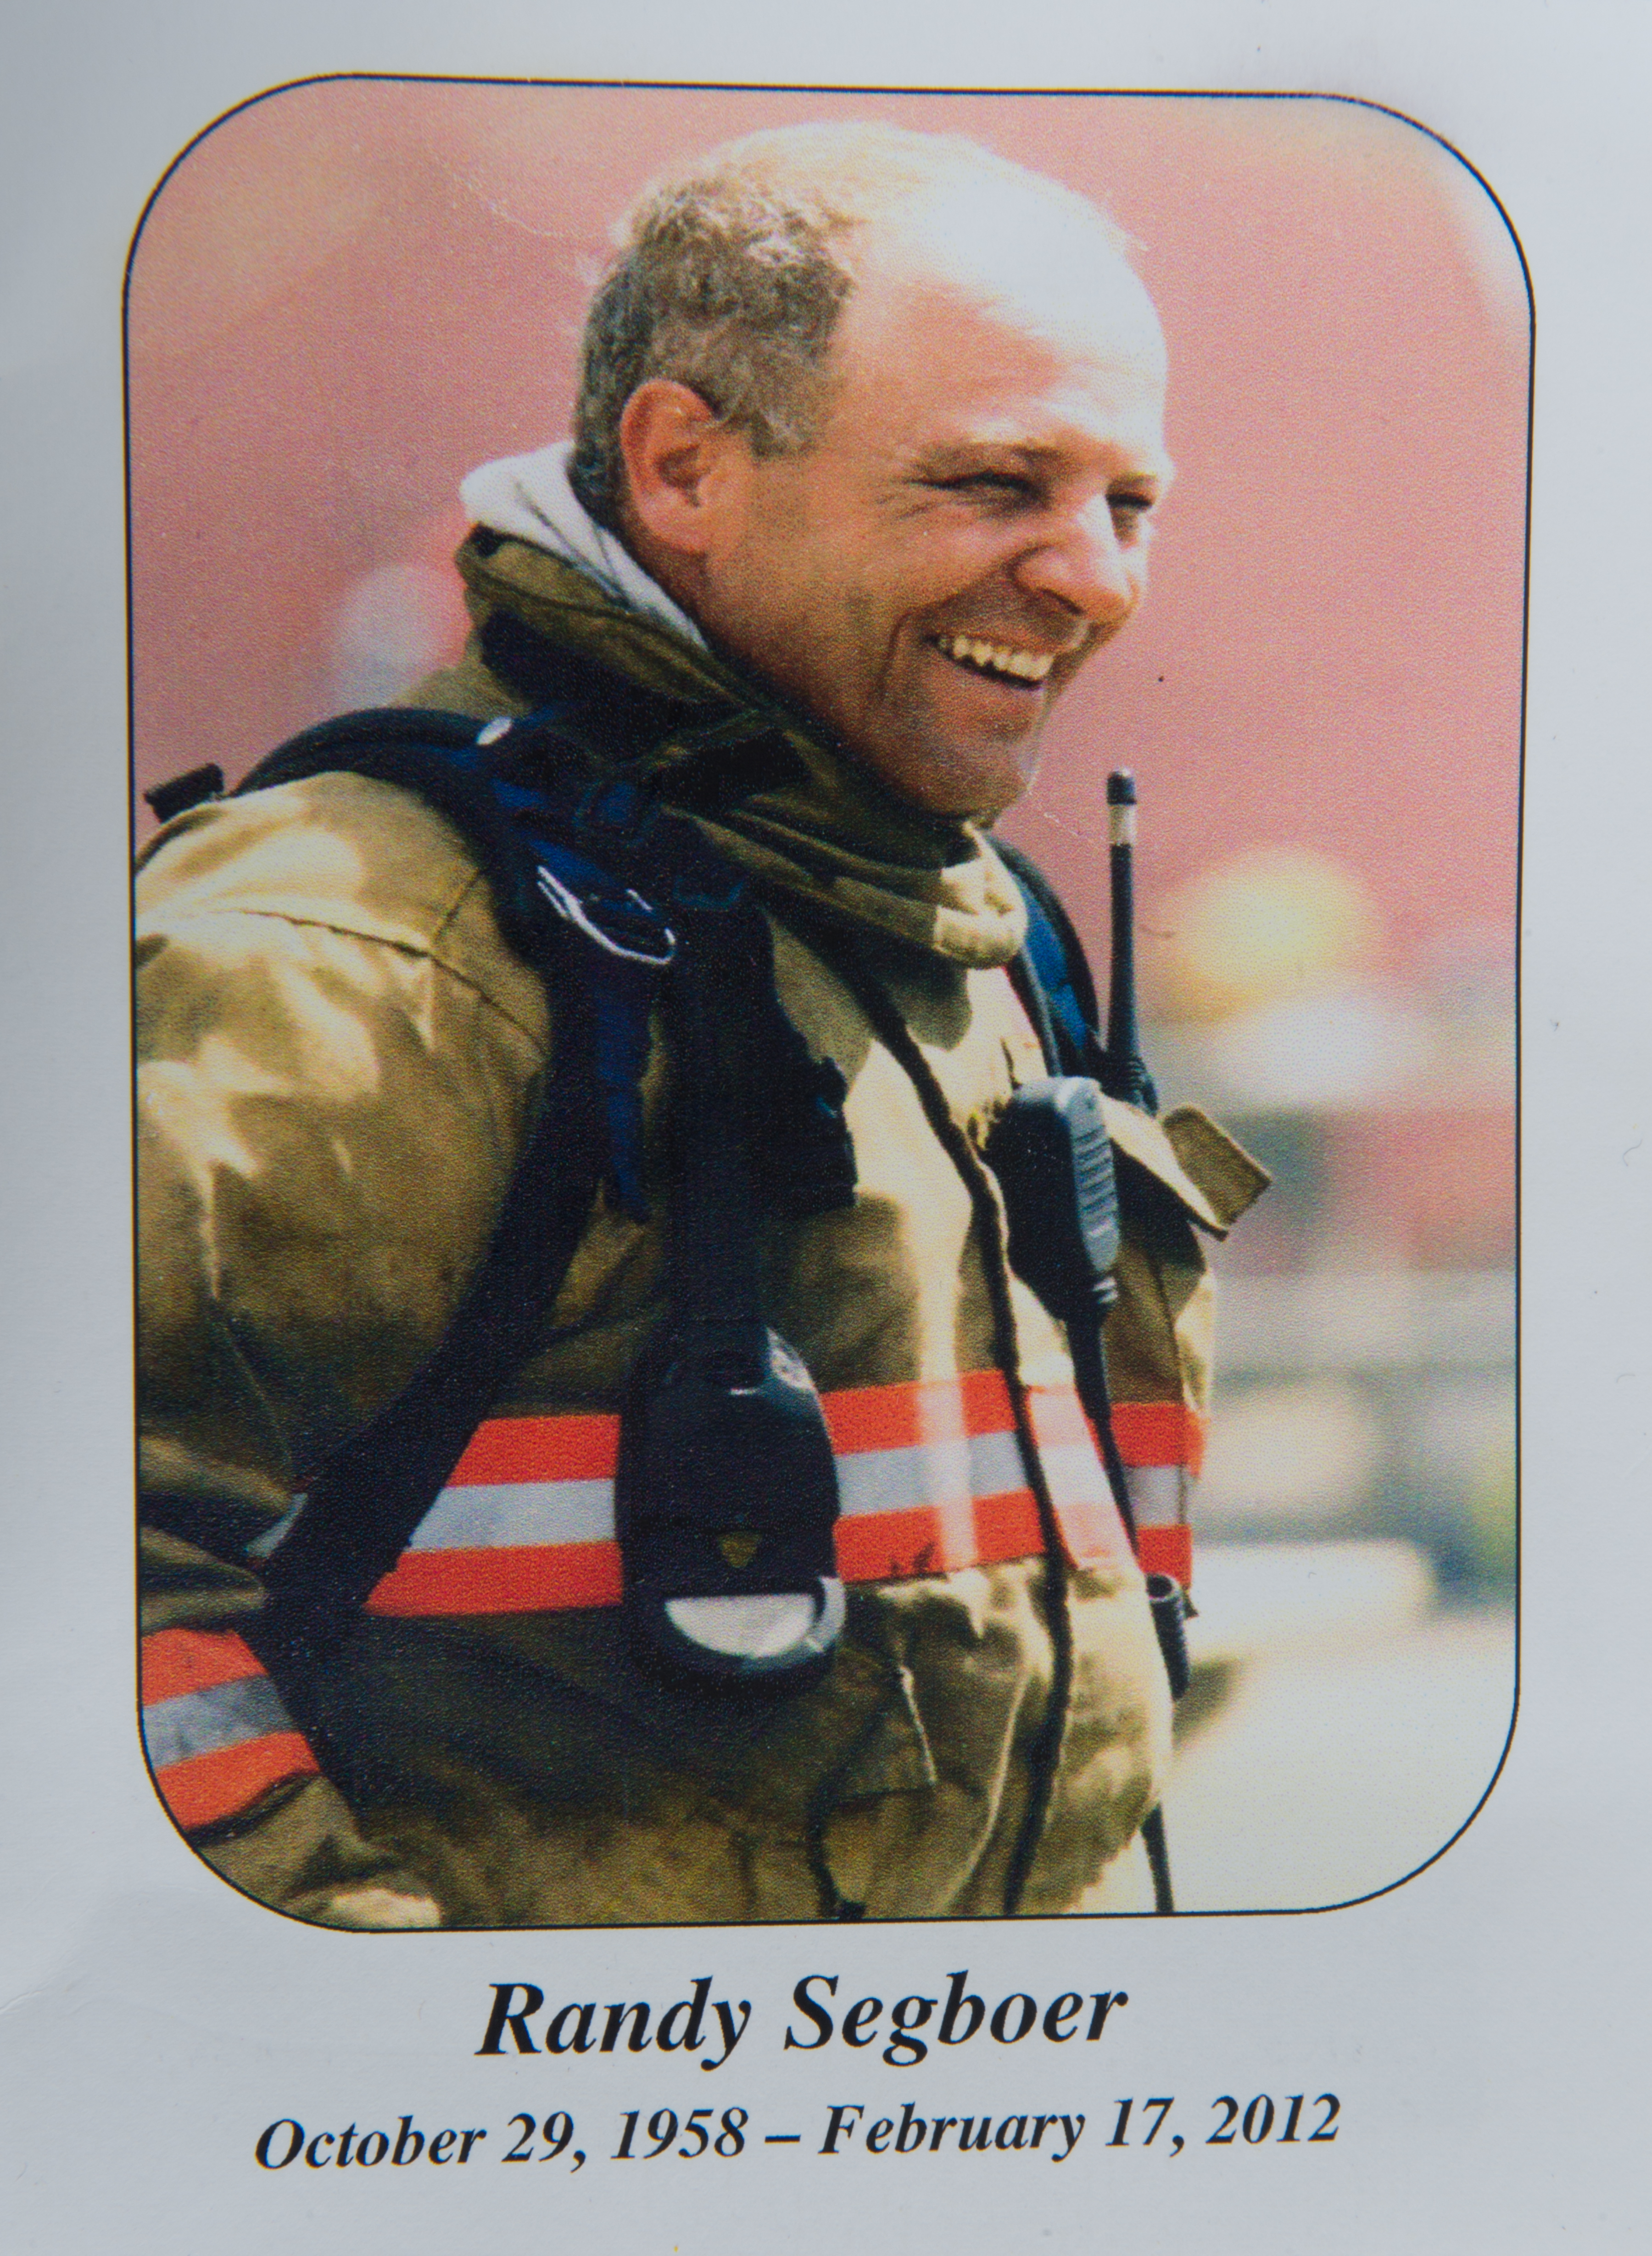 Memorial photo card showing a smiling firefighter in firefighting gear. Underneath the photo is: 'Randy Segboer October 29, 1958 - February 17, 2012'